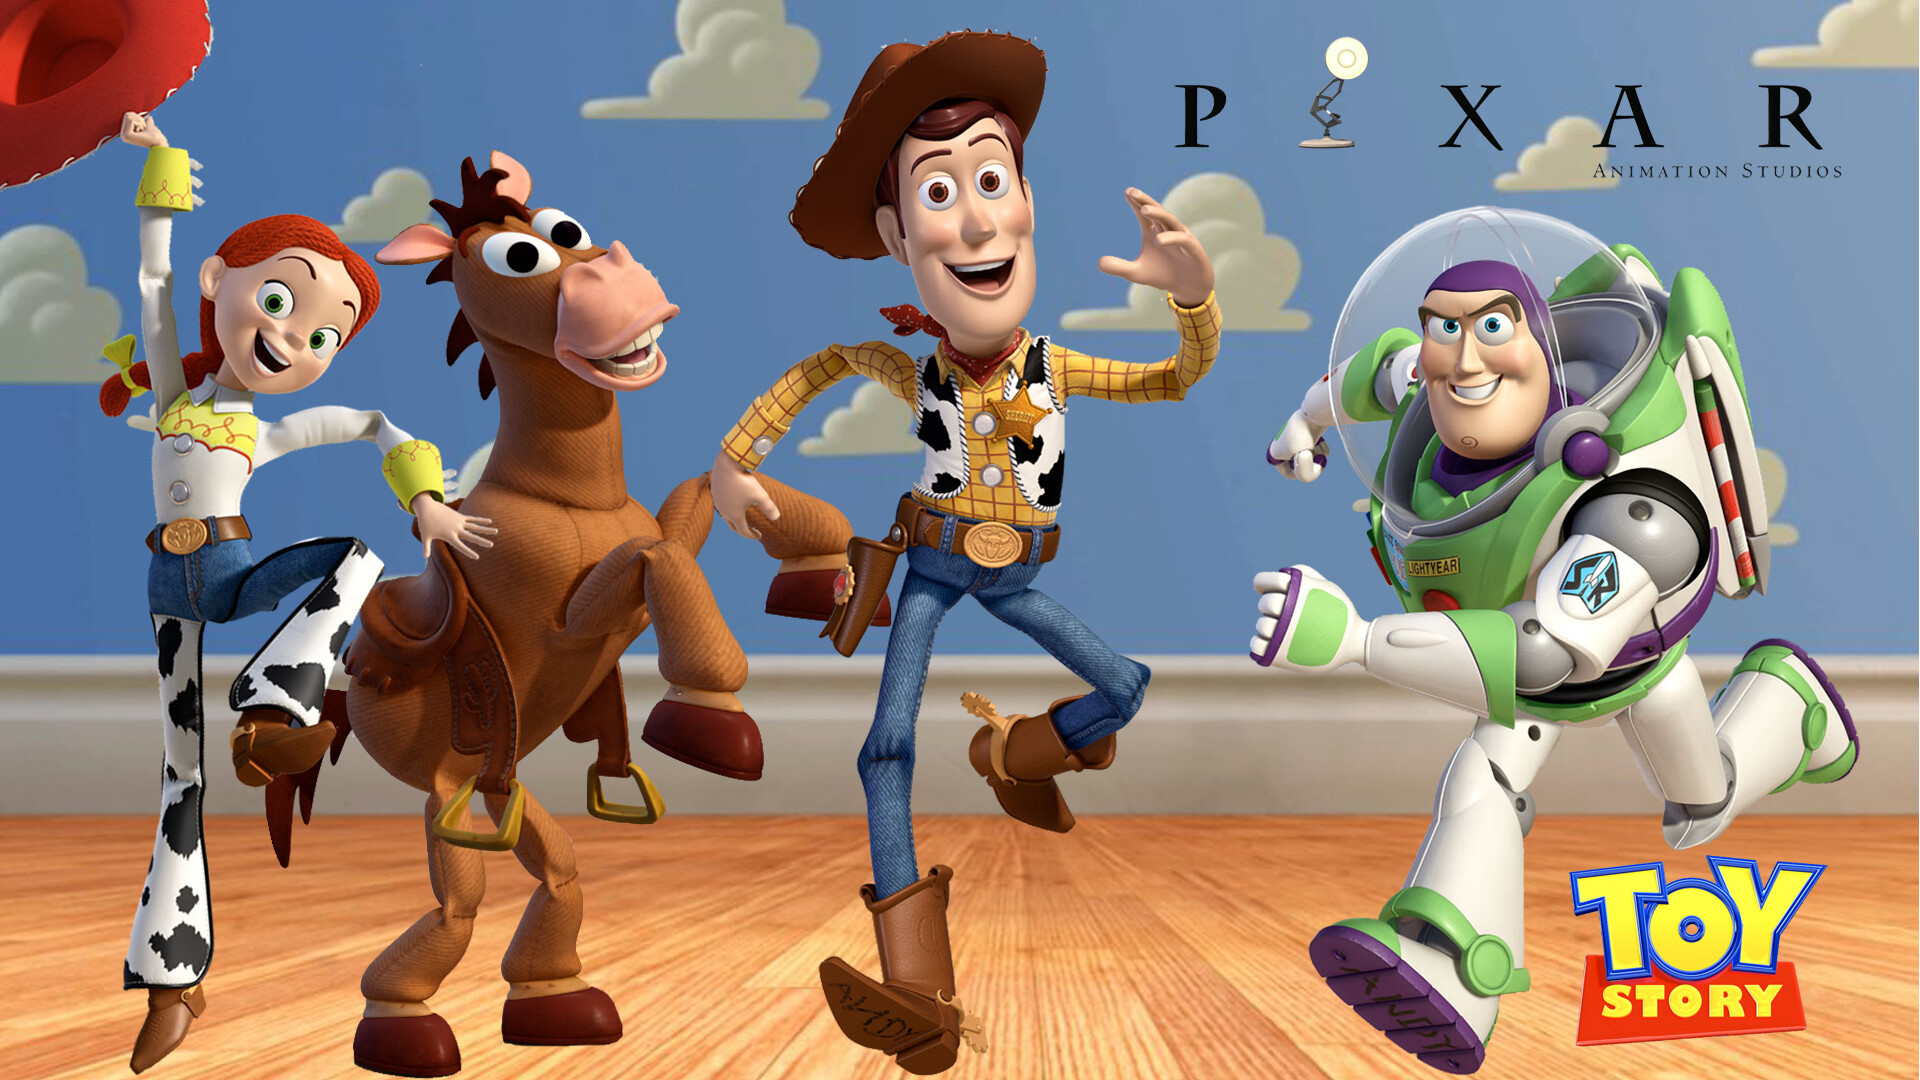 Toy Story: A CGI animated media franchise created by Pixar and distributed by Walt Disney Pictures. 1920x1080 Full HD Wallpaper.